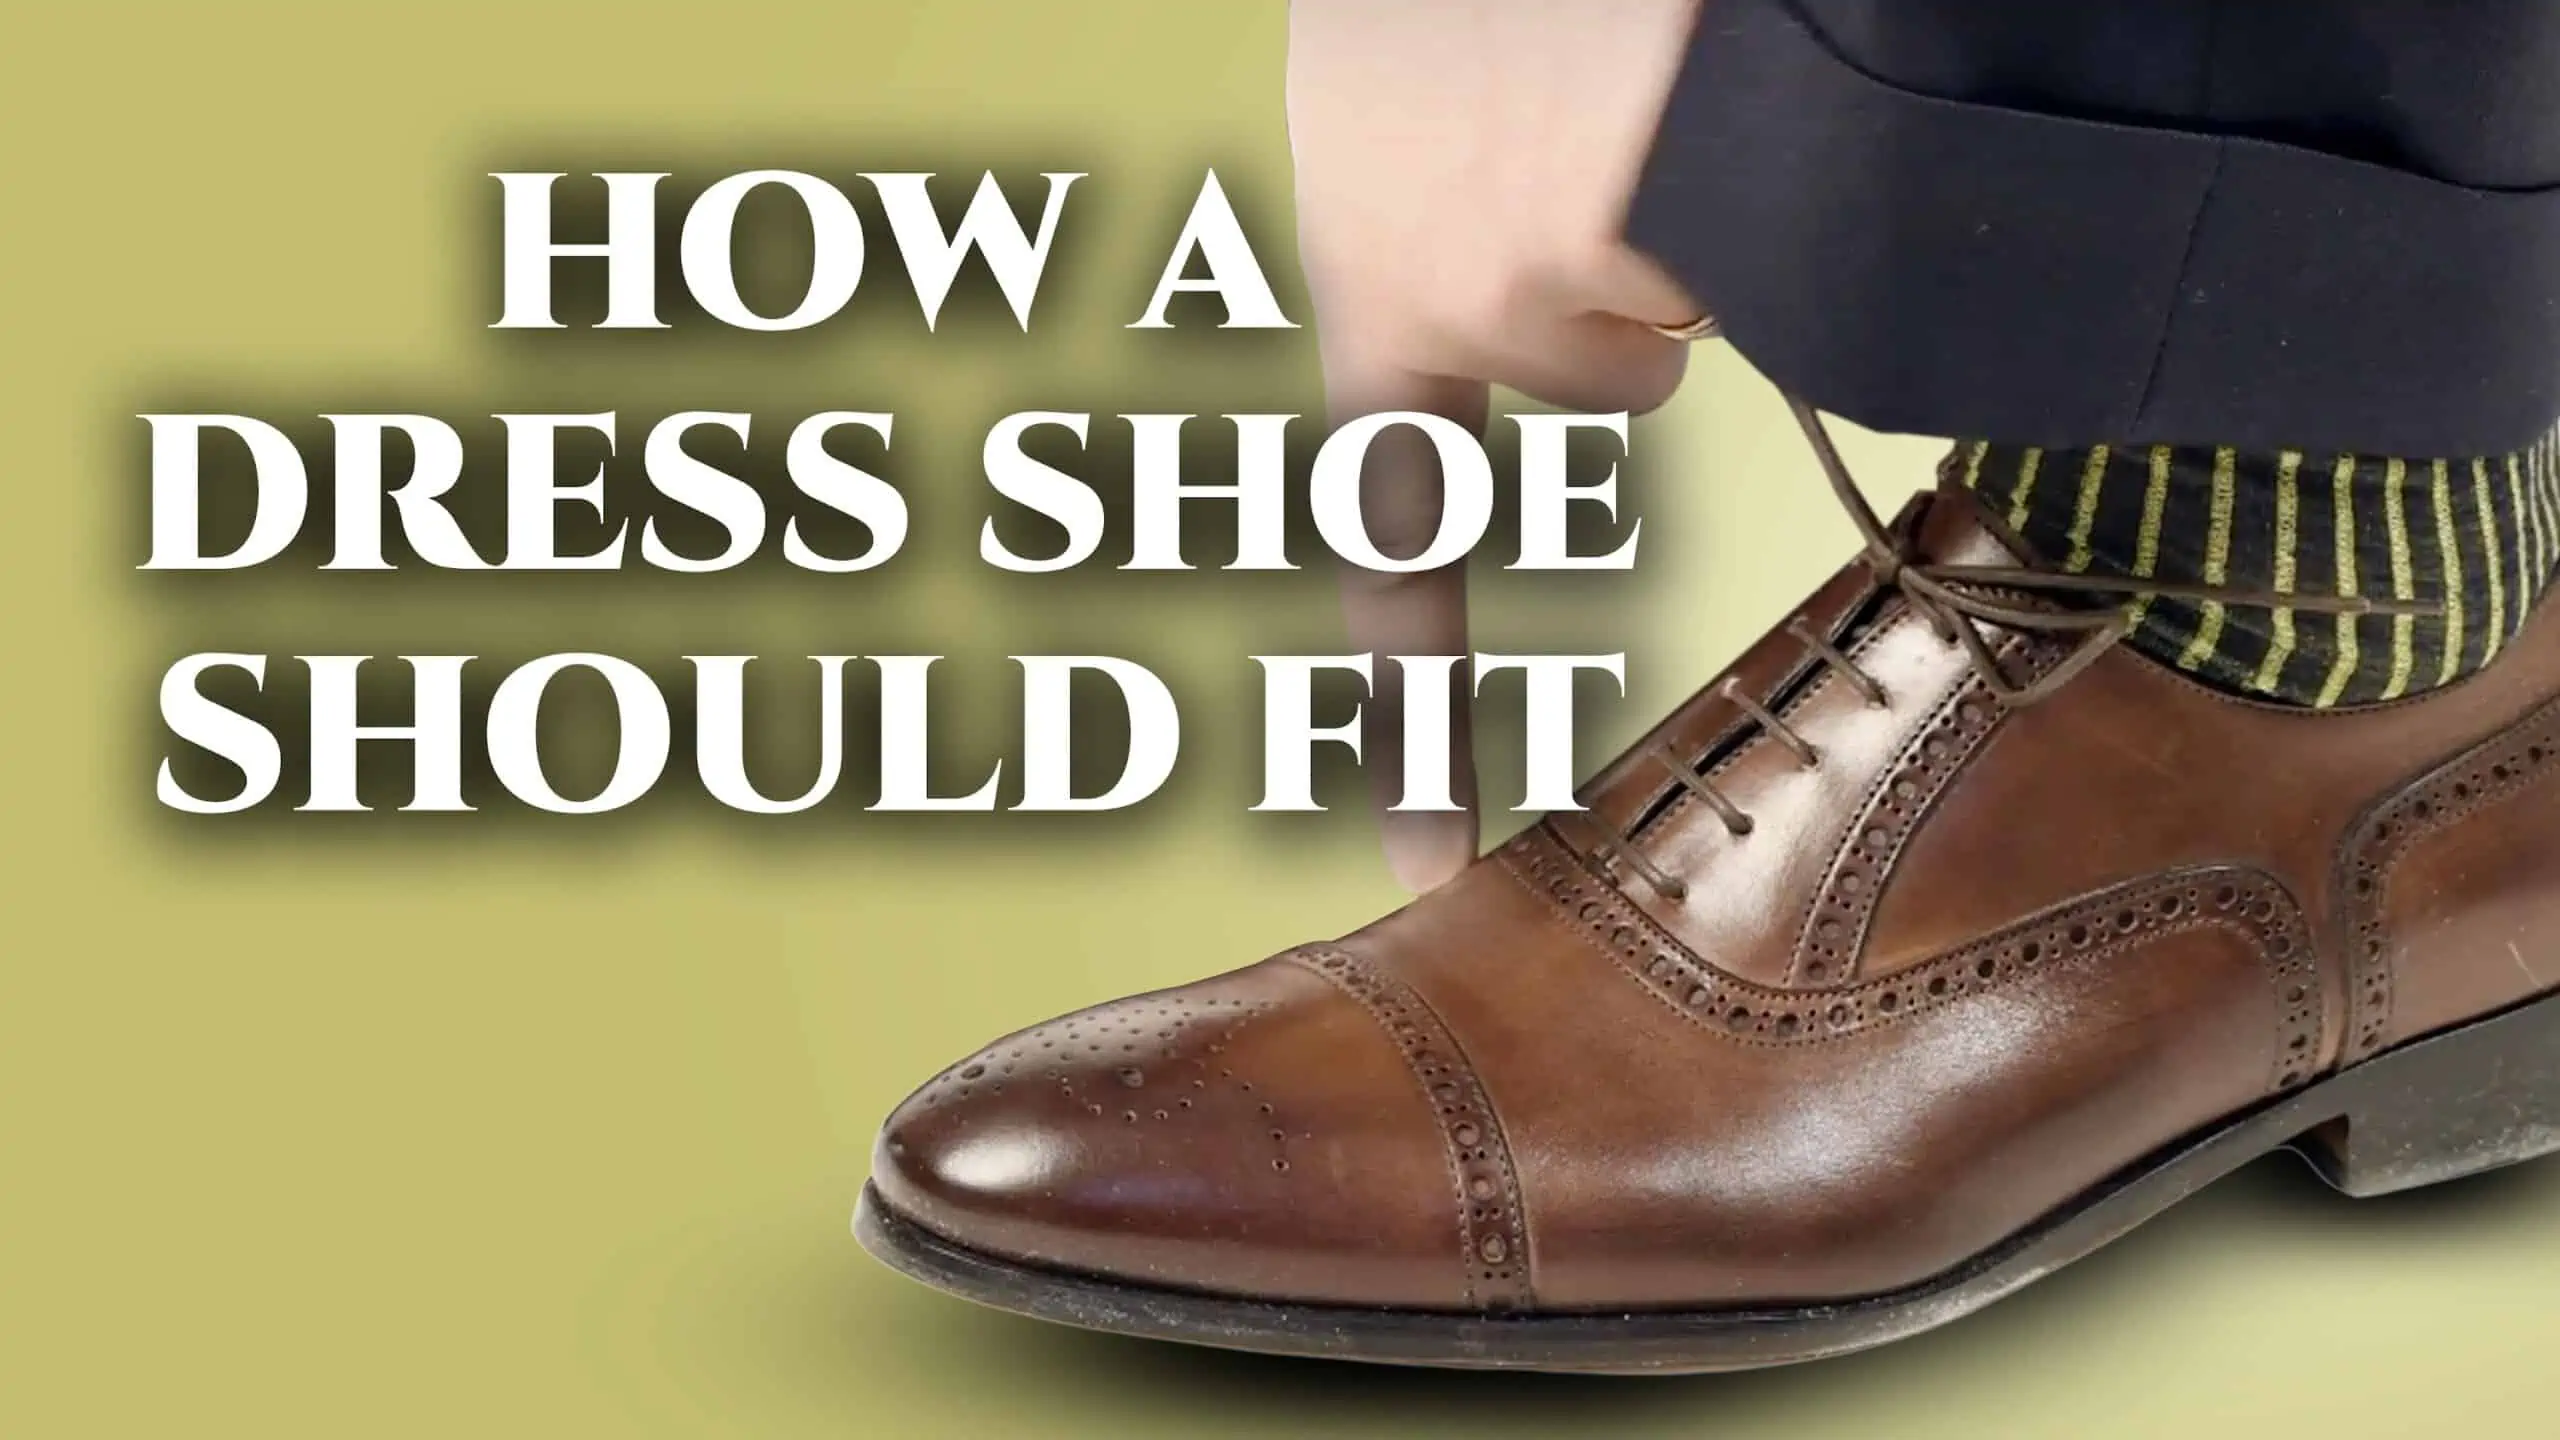 How A Dress Shoe Should Fit - Guide To Finding Your Shoe Size